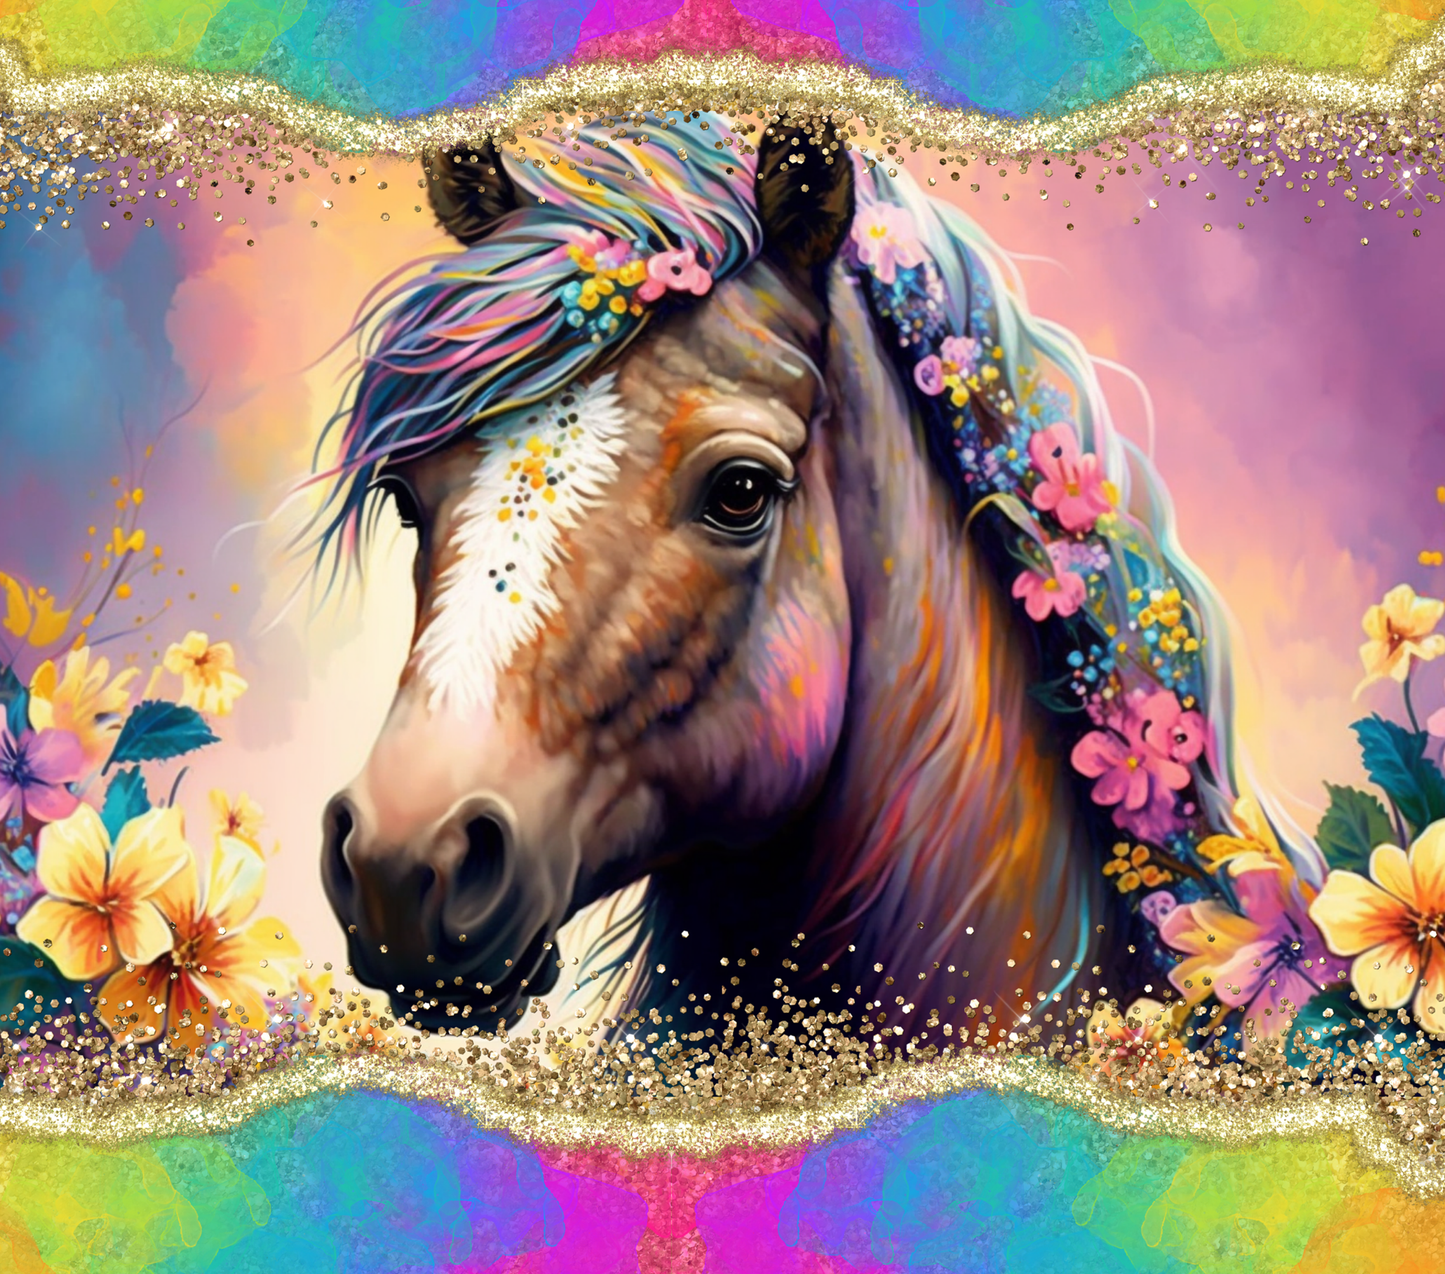 Horse with Rainbow colors